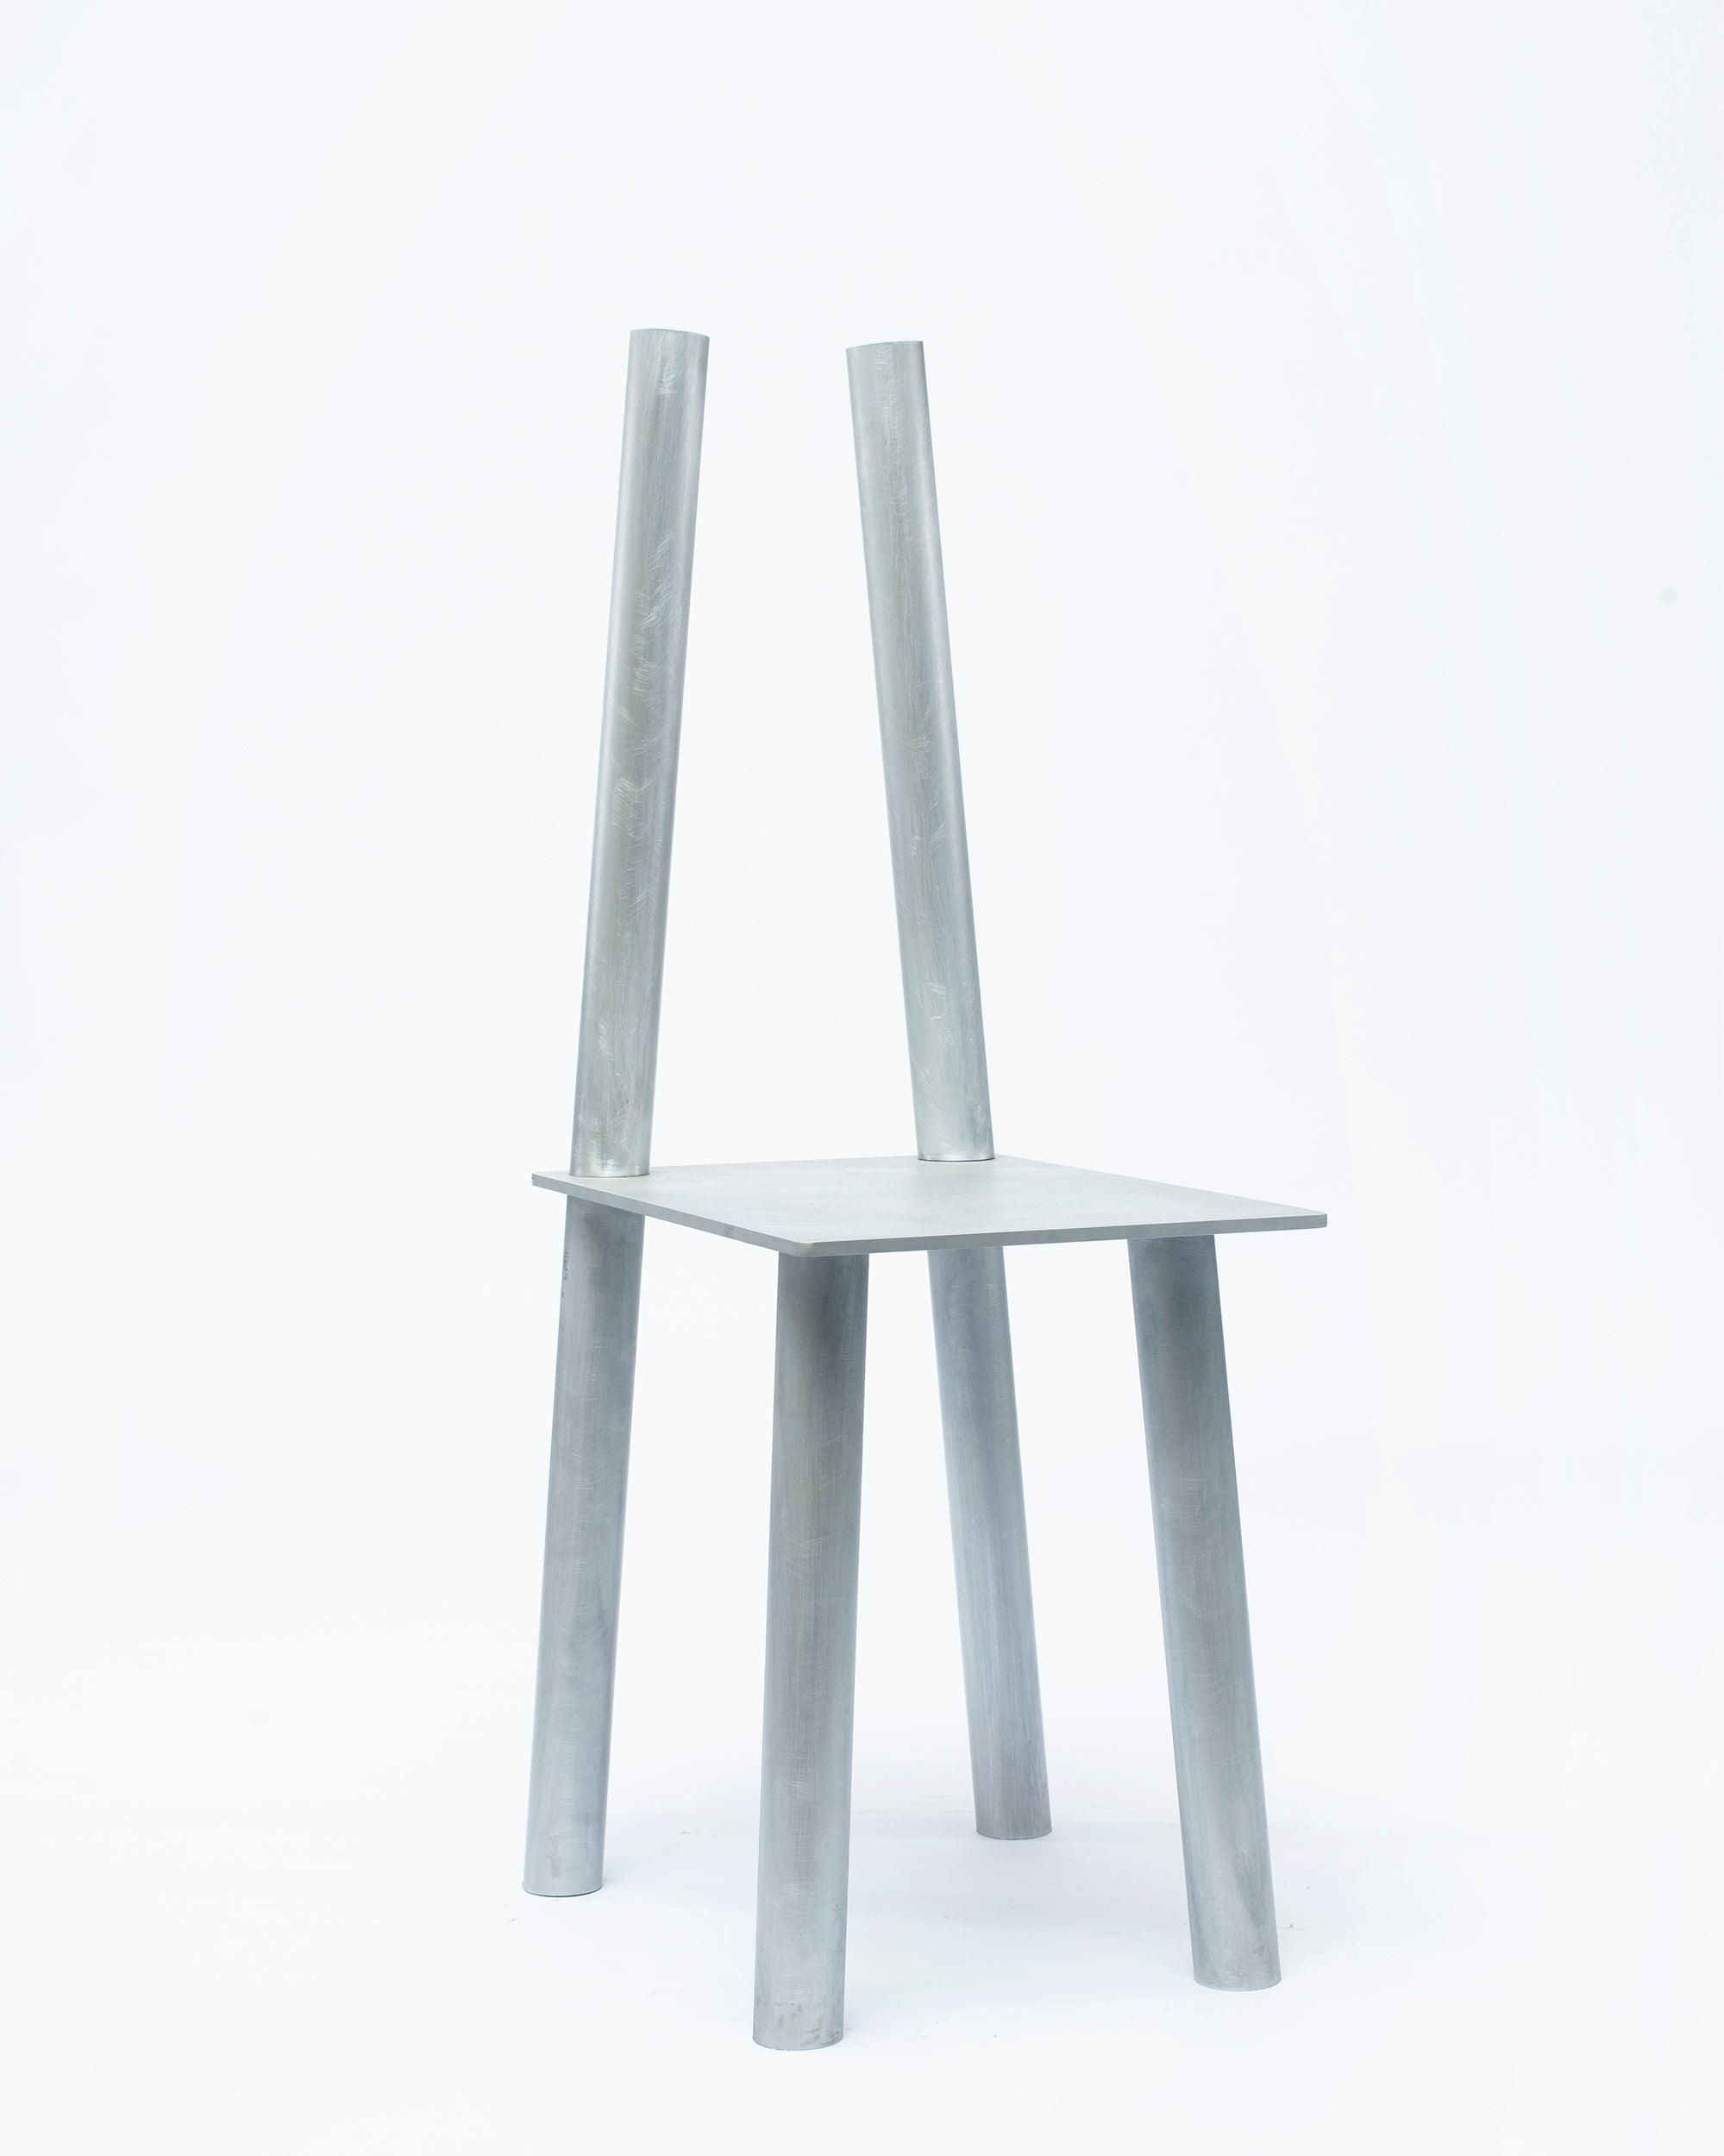 Aluminum decorative chair P-L series with slanted view on white background